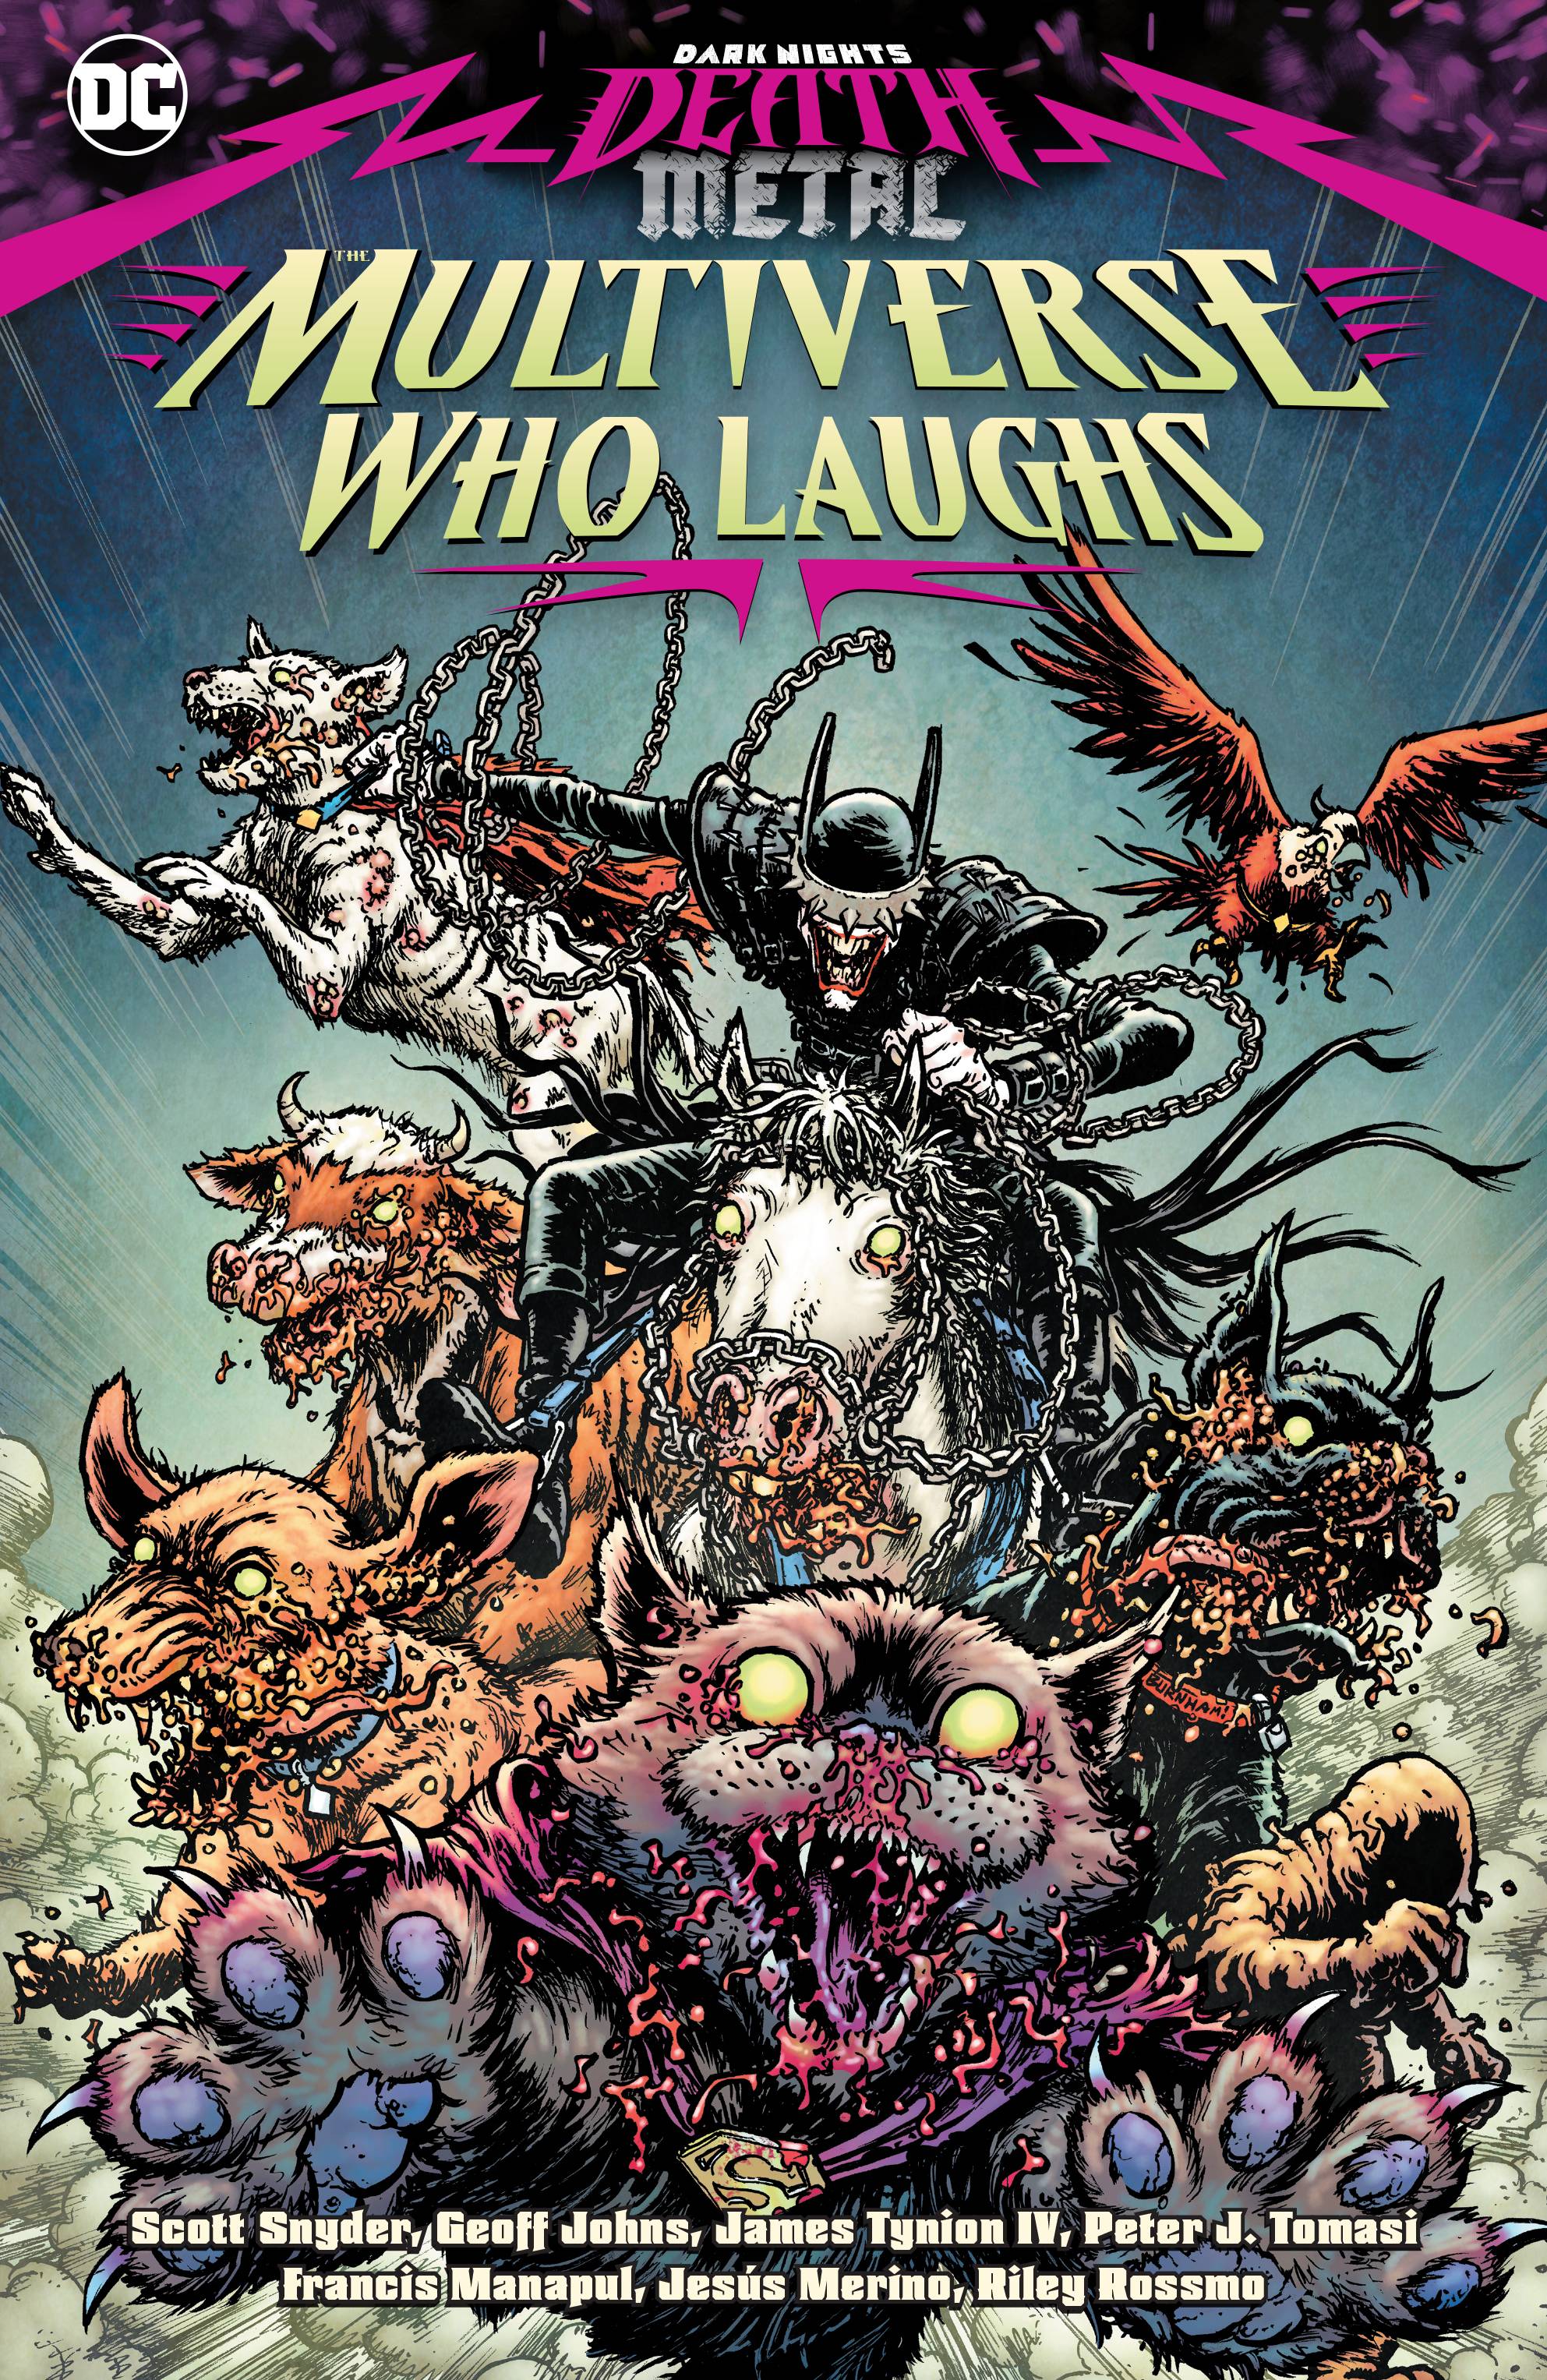 Dark Nights: Death Metal The Multiverse Who Laughs s/c